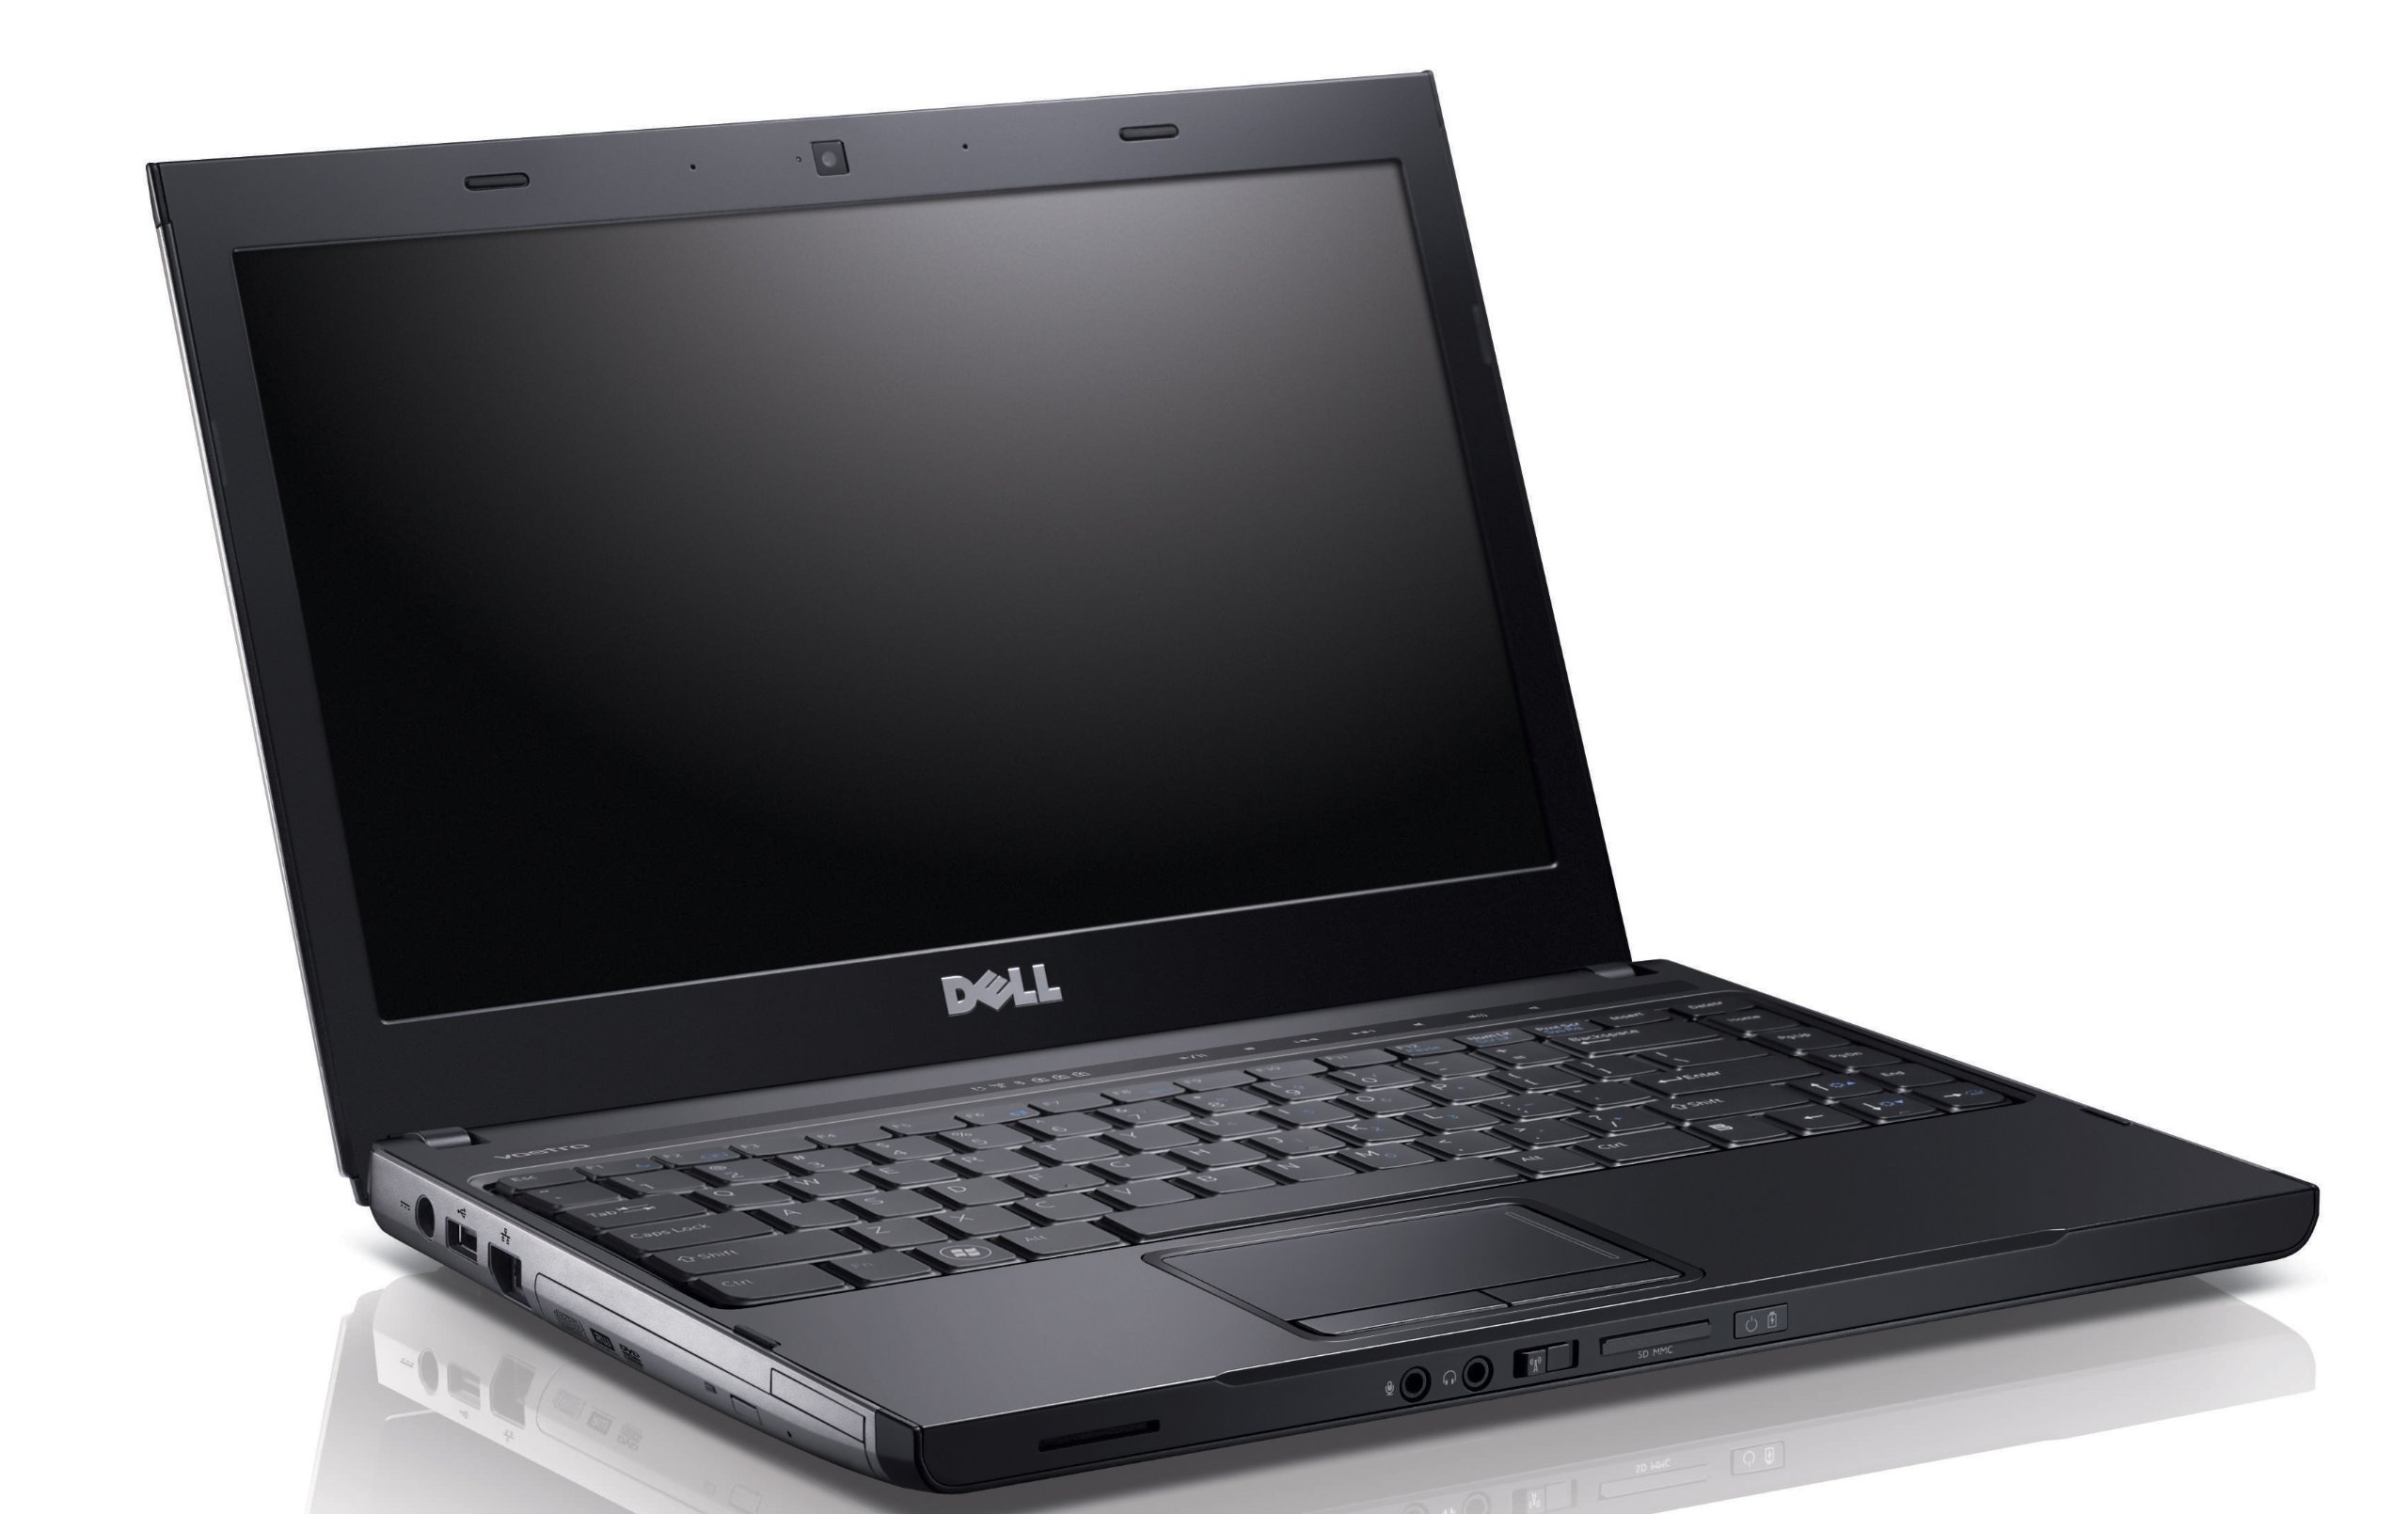 Dell Vostro 3700 DDR3 Notebook